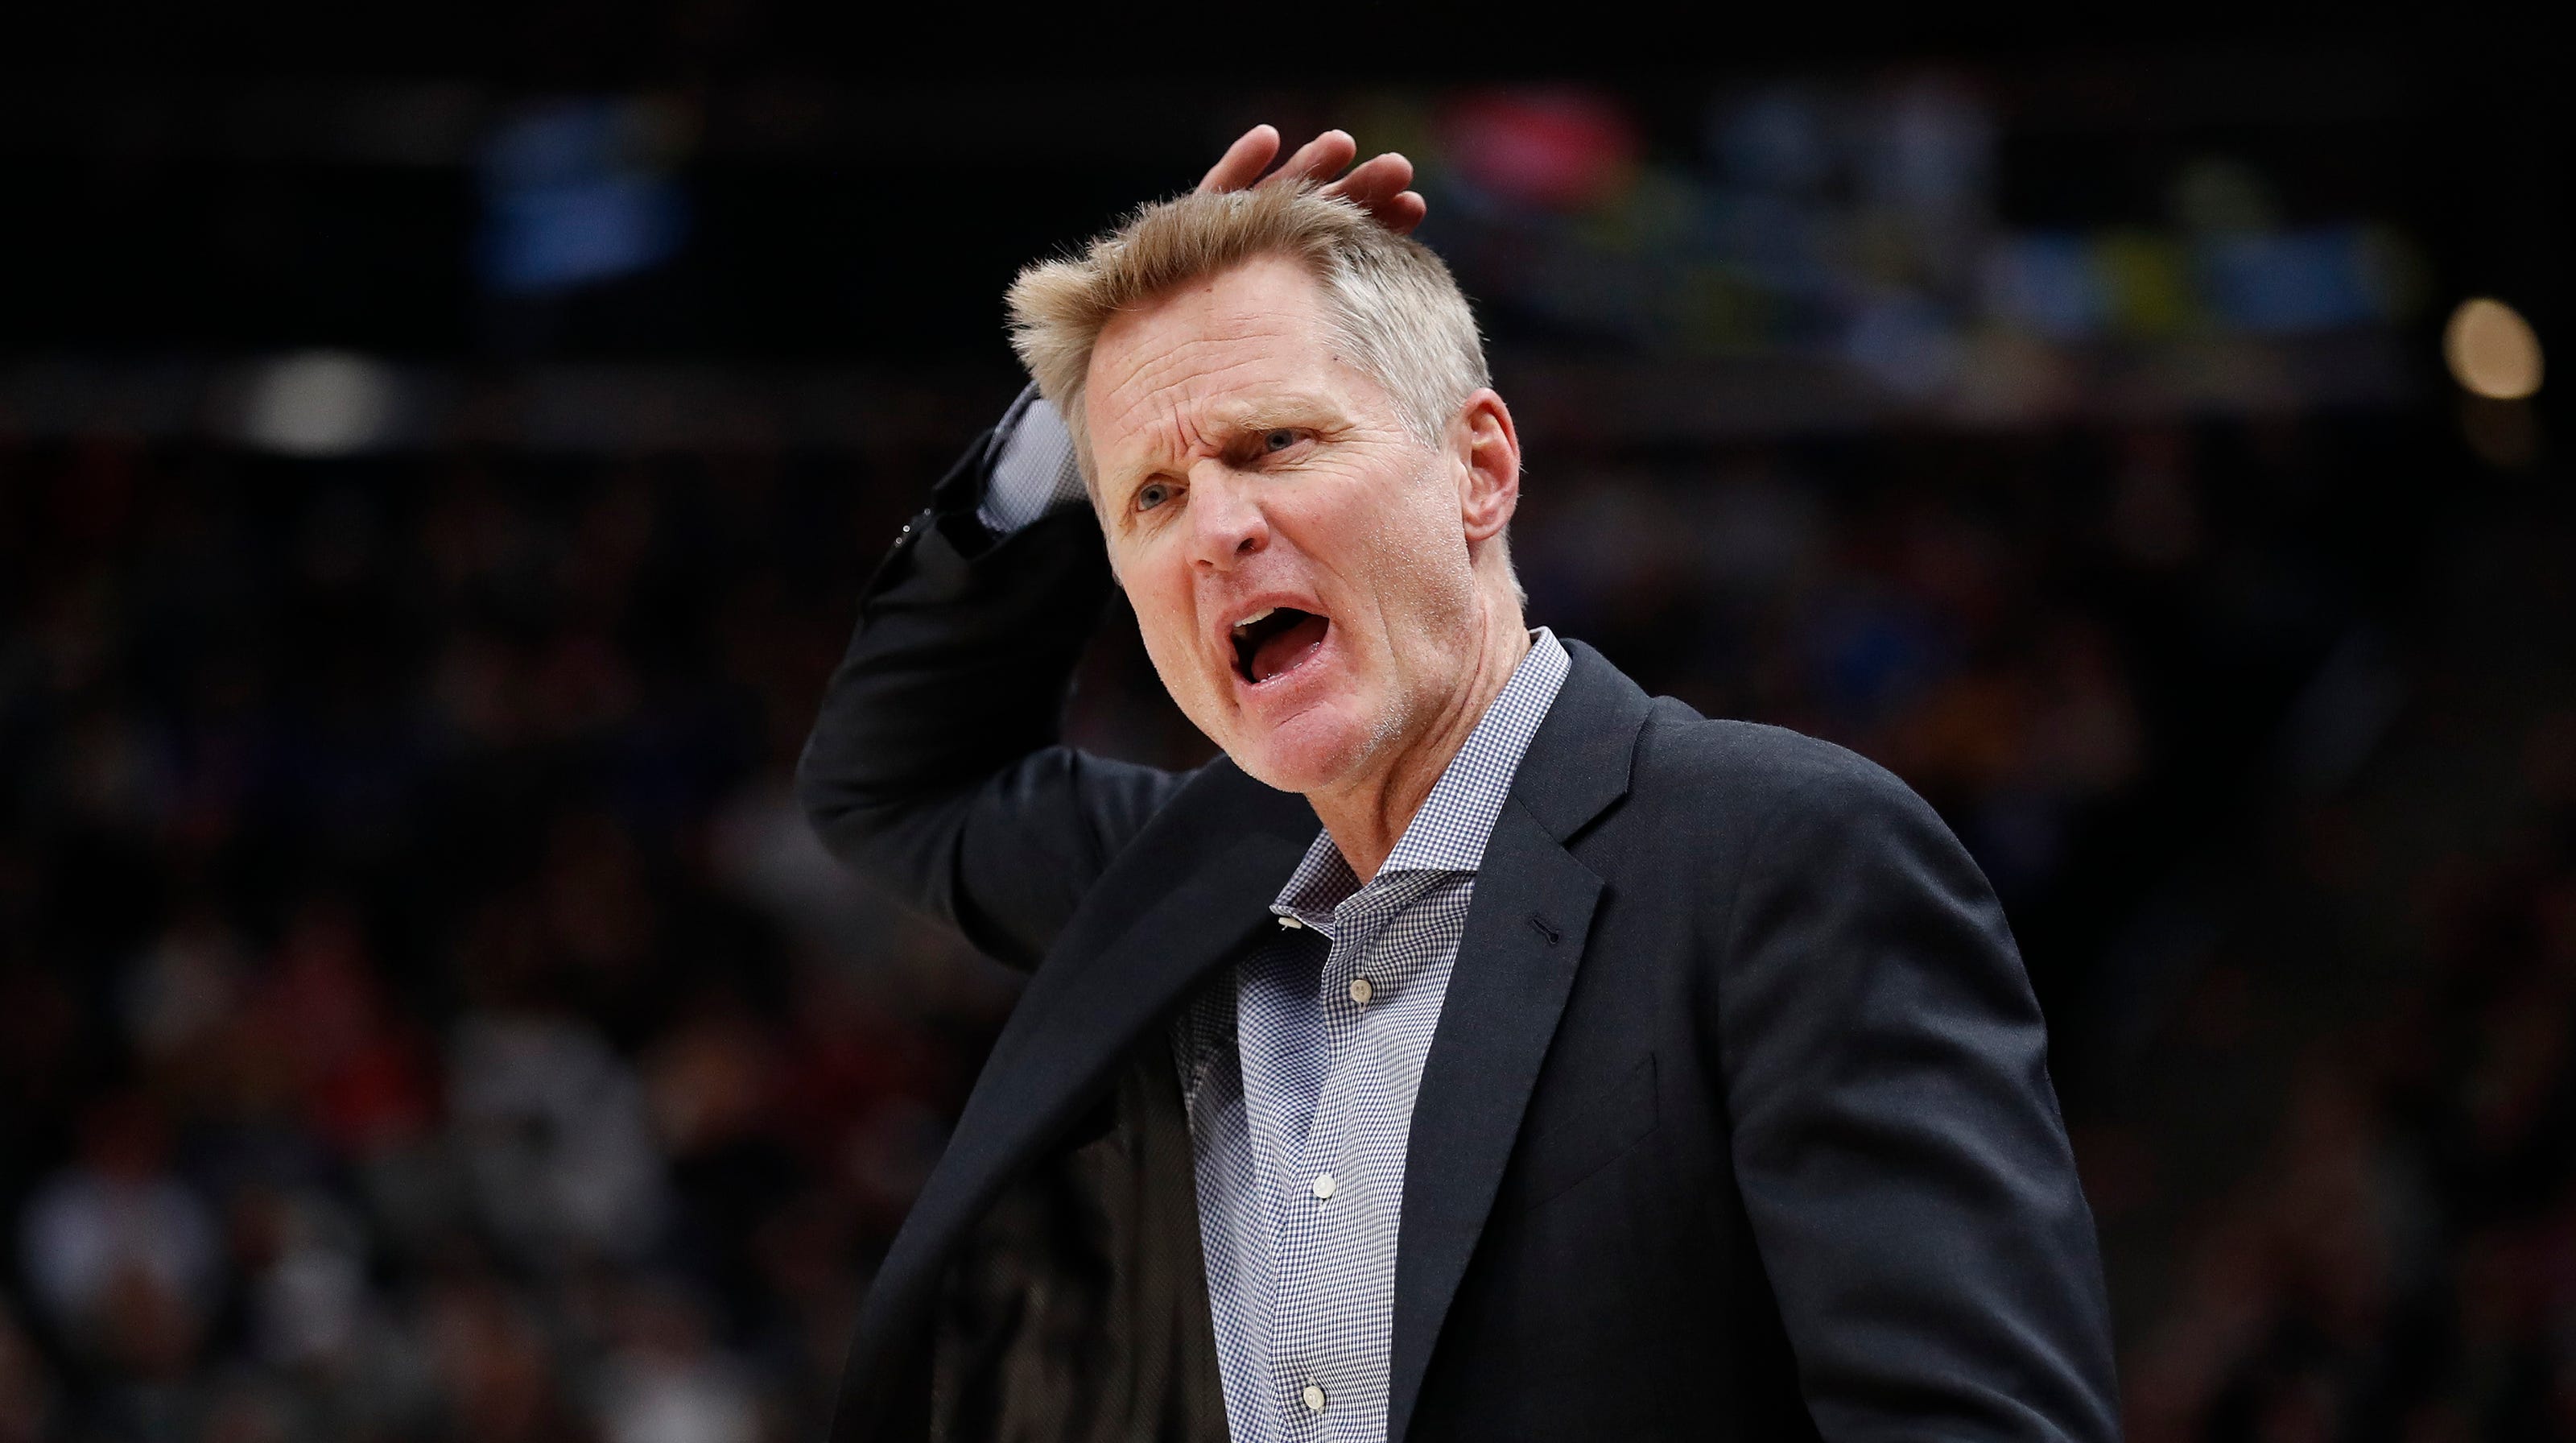 Golden State Warriors: Coach says NBA champs 'most scrutinized team' ever